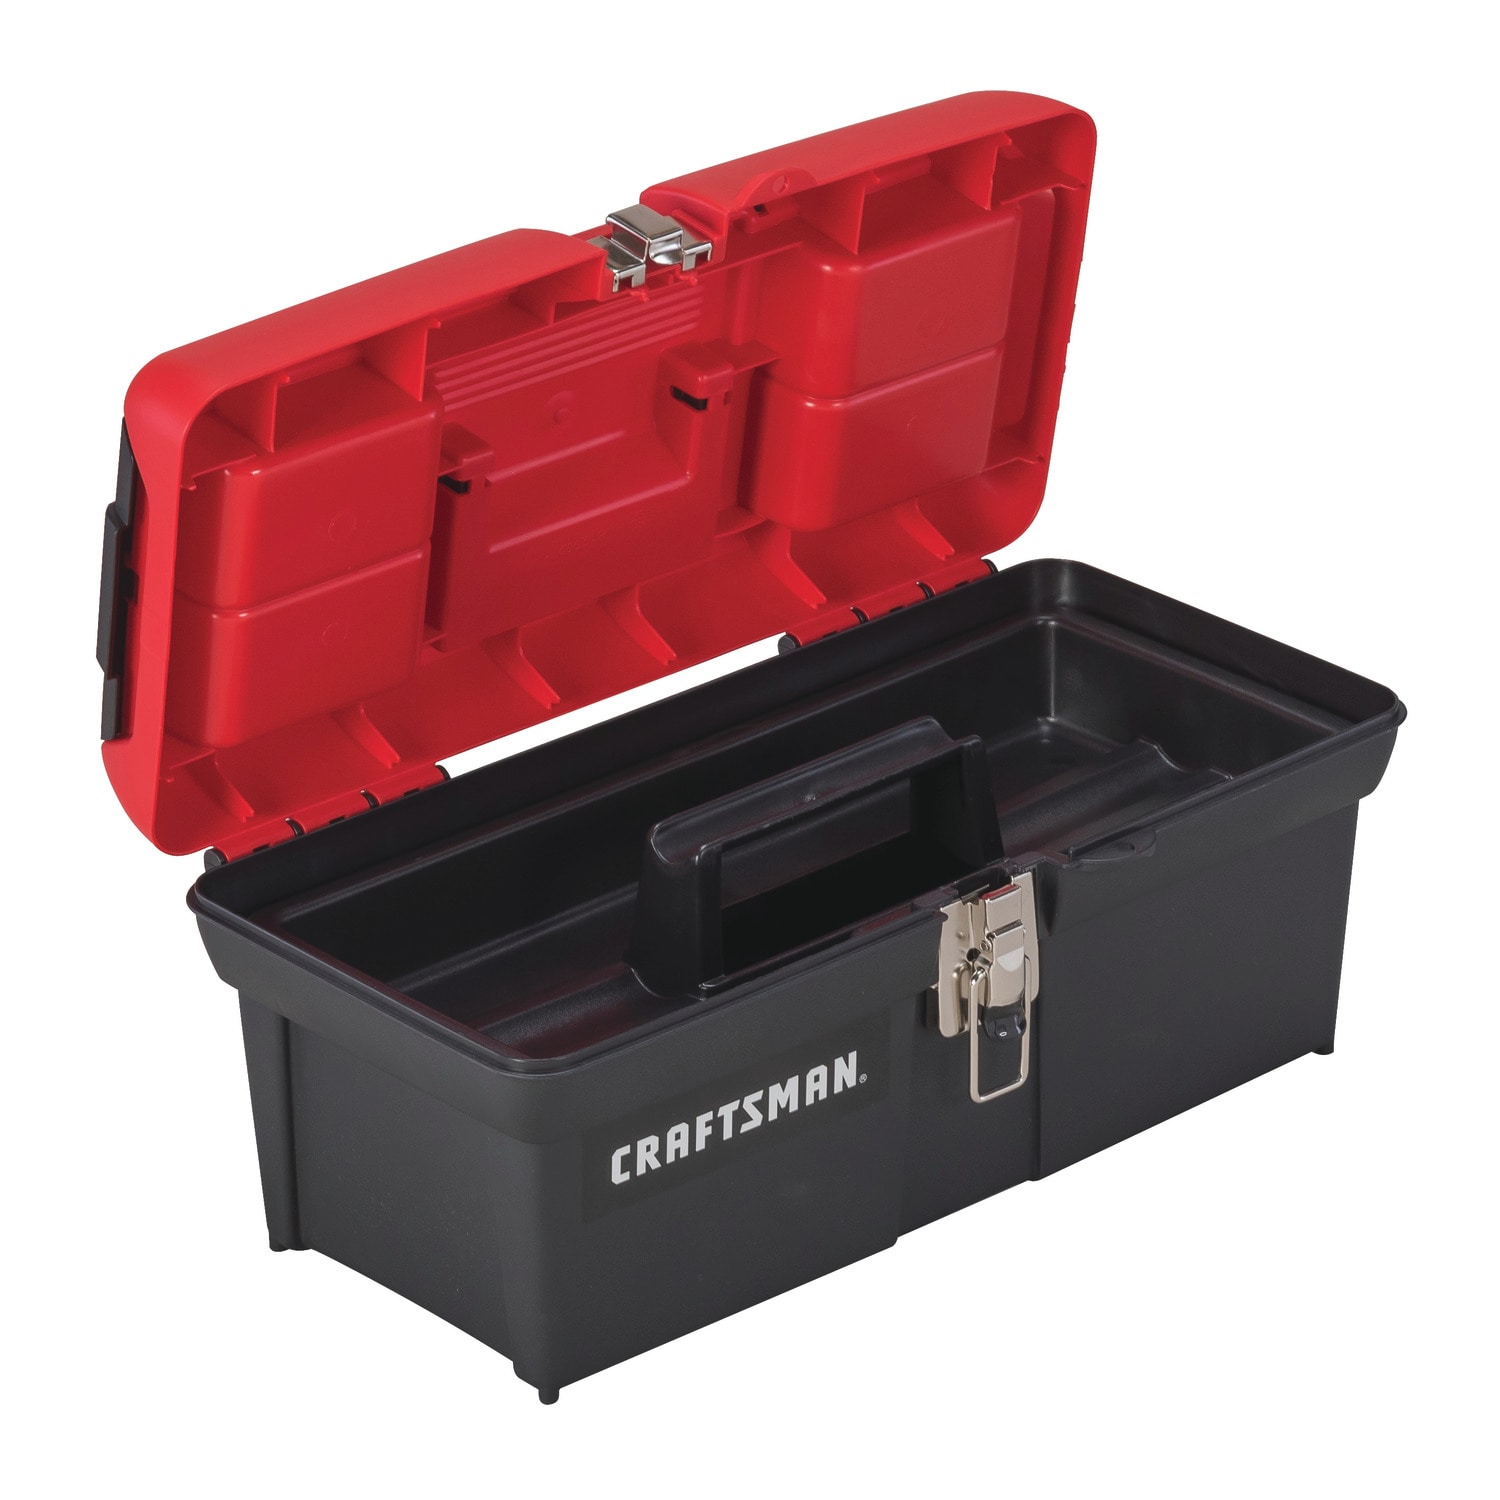 Metal Tool Boxes Tools Box Organizer Portable Storage Case for Home Garage, Size: 38cmx16cmx13cm, Red